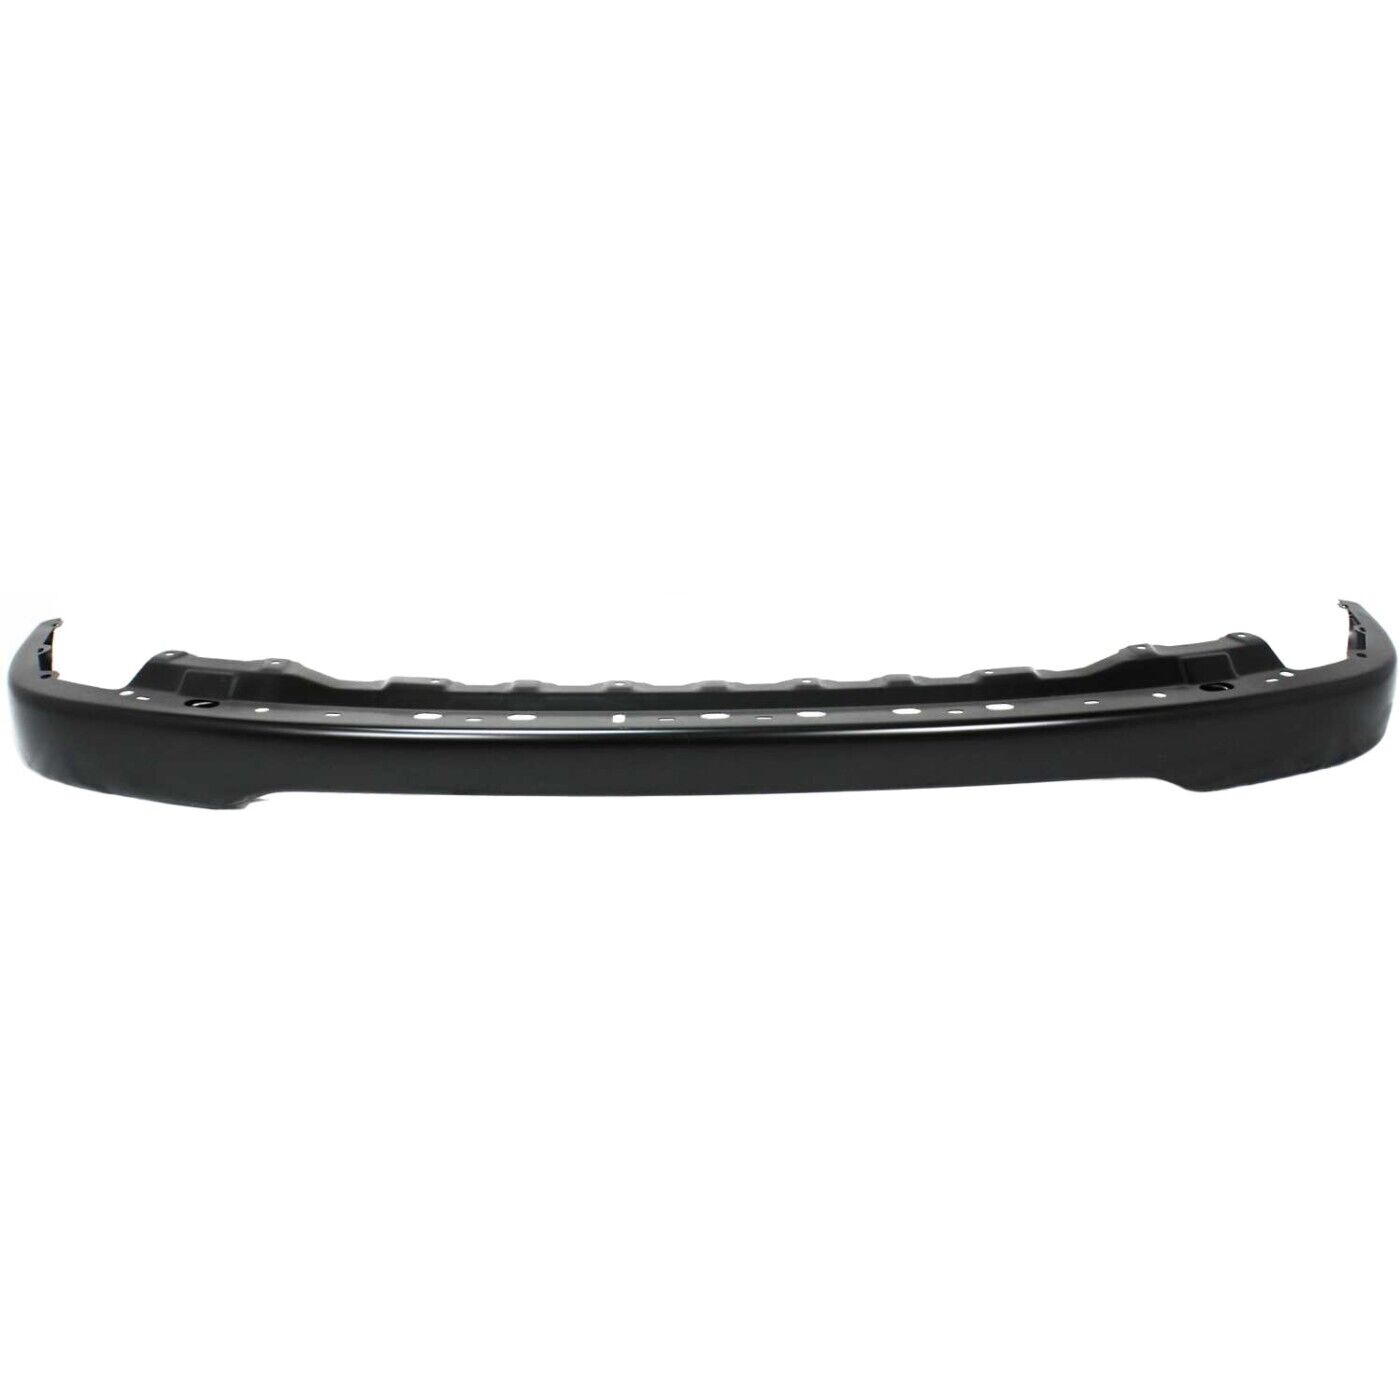 Front Bumper For 2001-2004 Toyota Tacoma, Steel, Black